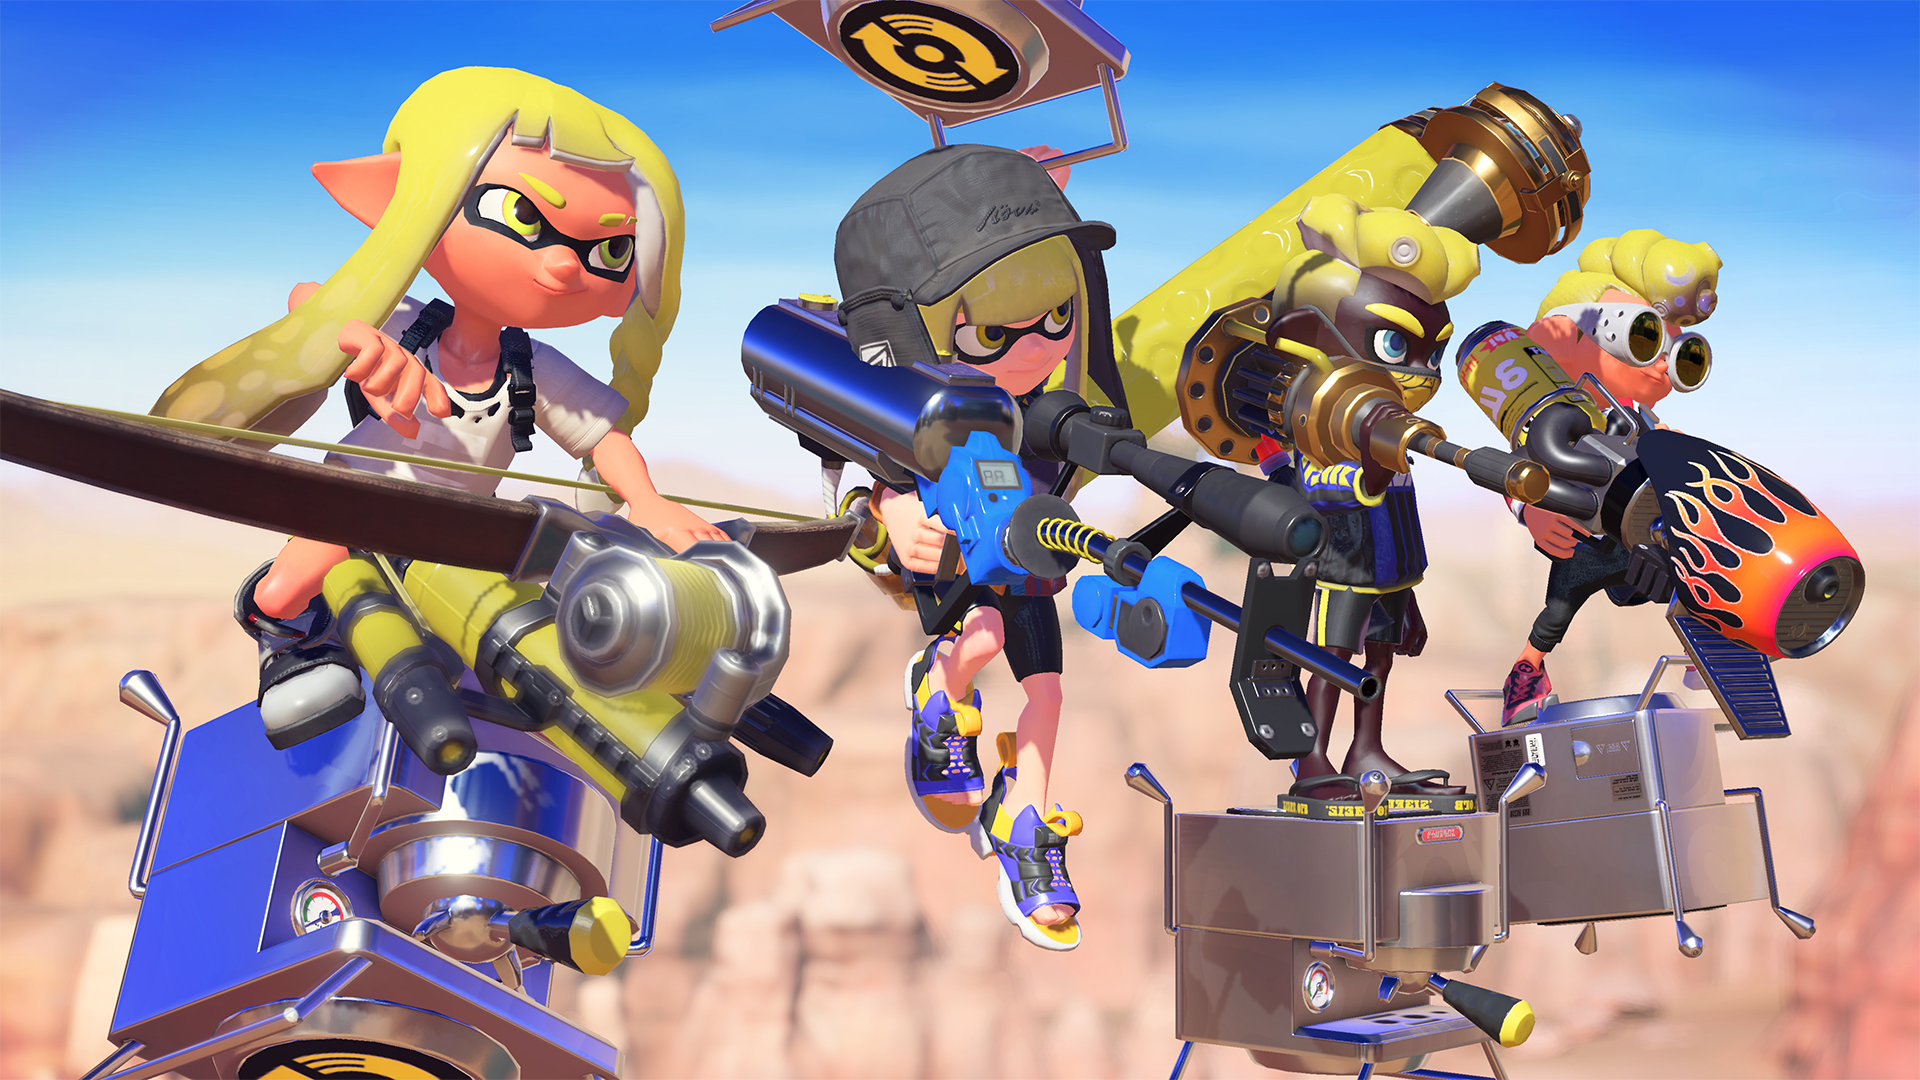 Nintendo Uk Vs Here S A Look At A New Special Weapon Making Its Debut In Splatoon3 As Well As A Chaotic Update To A Familiar Favourite T Co 28cxcedwwa Twitter